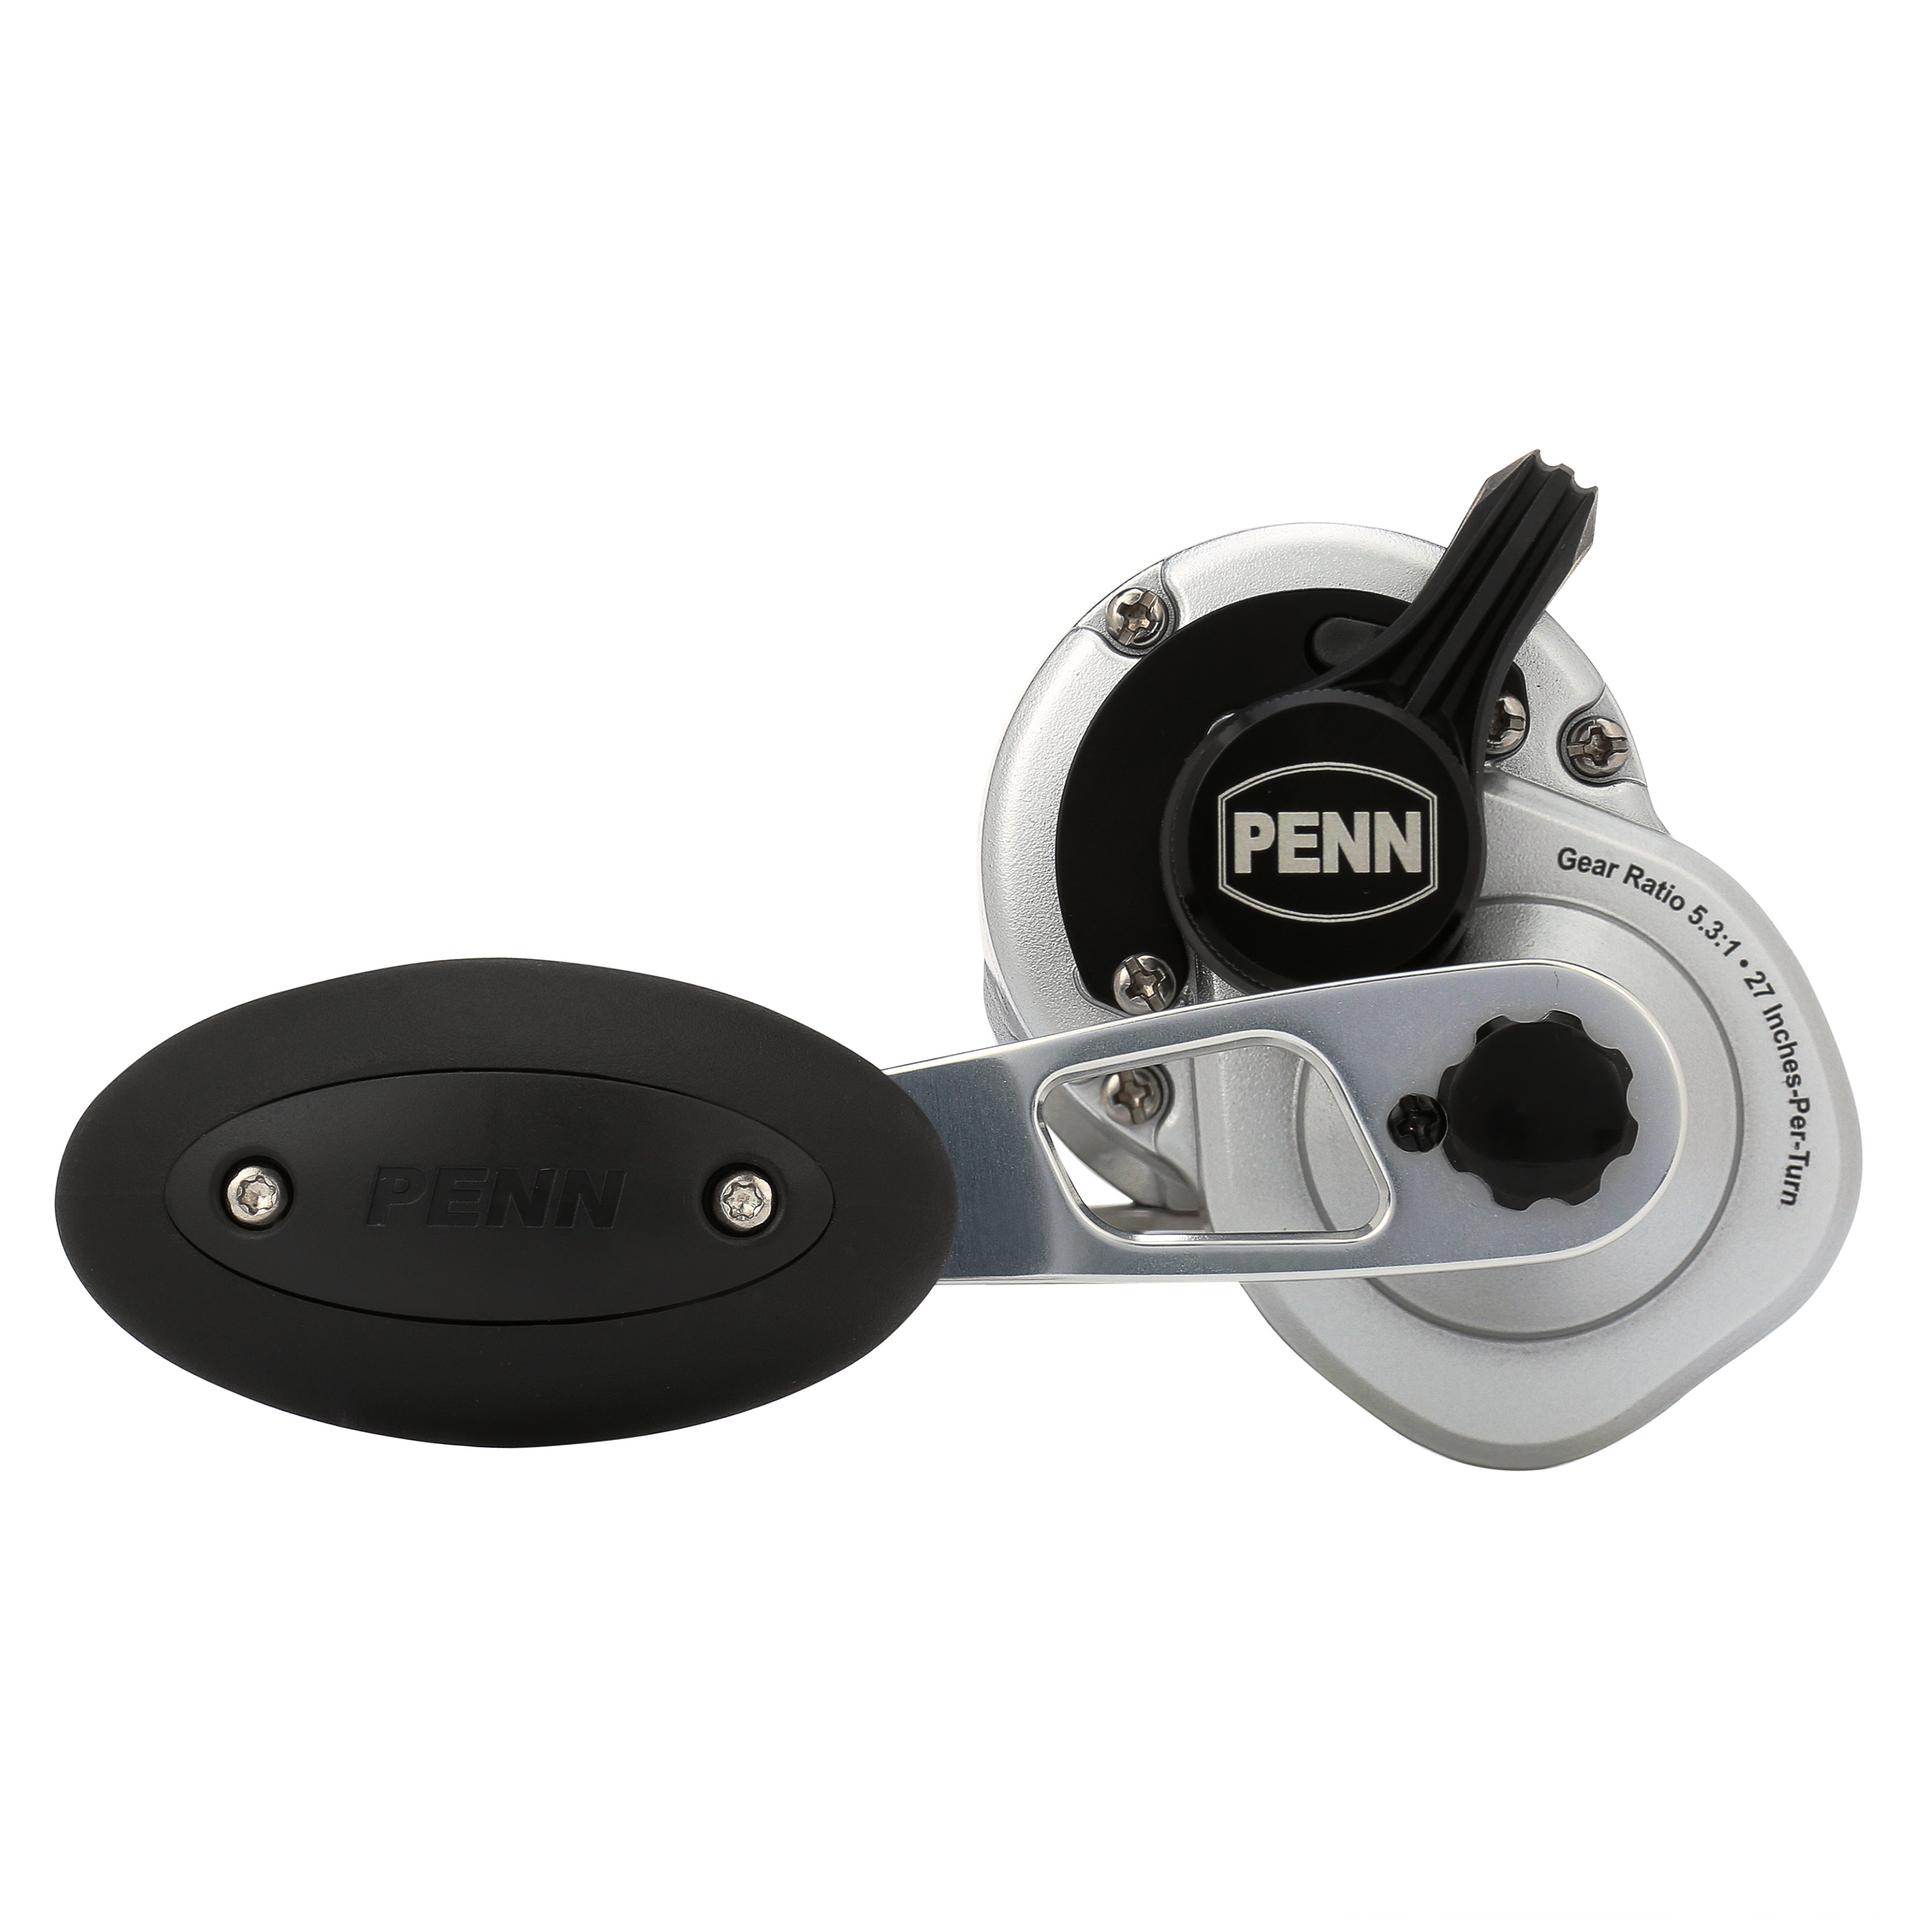 Penn FTHSD12 Fathom Star Drag Reels OEM Replacement Parts From